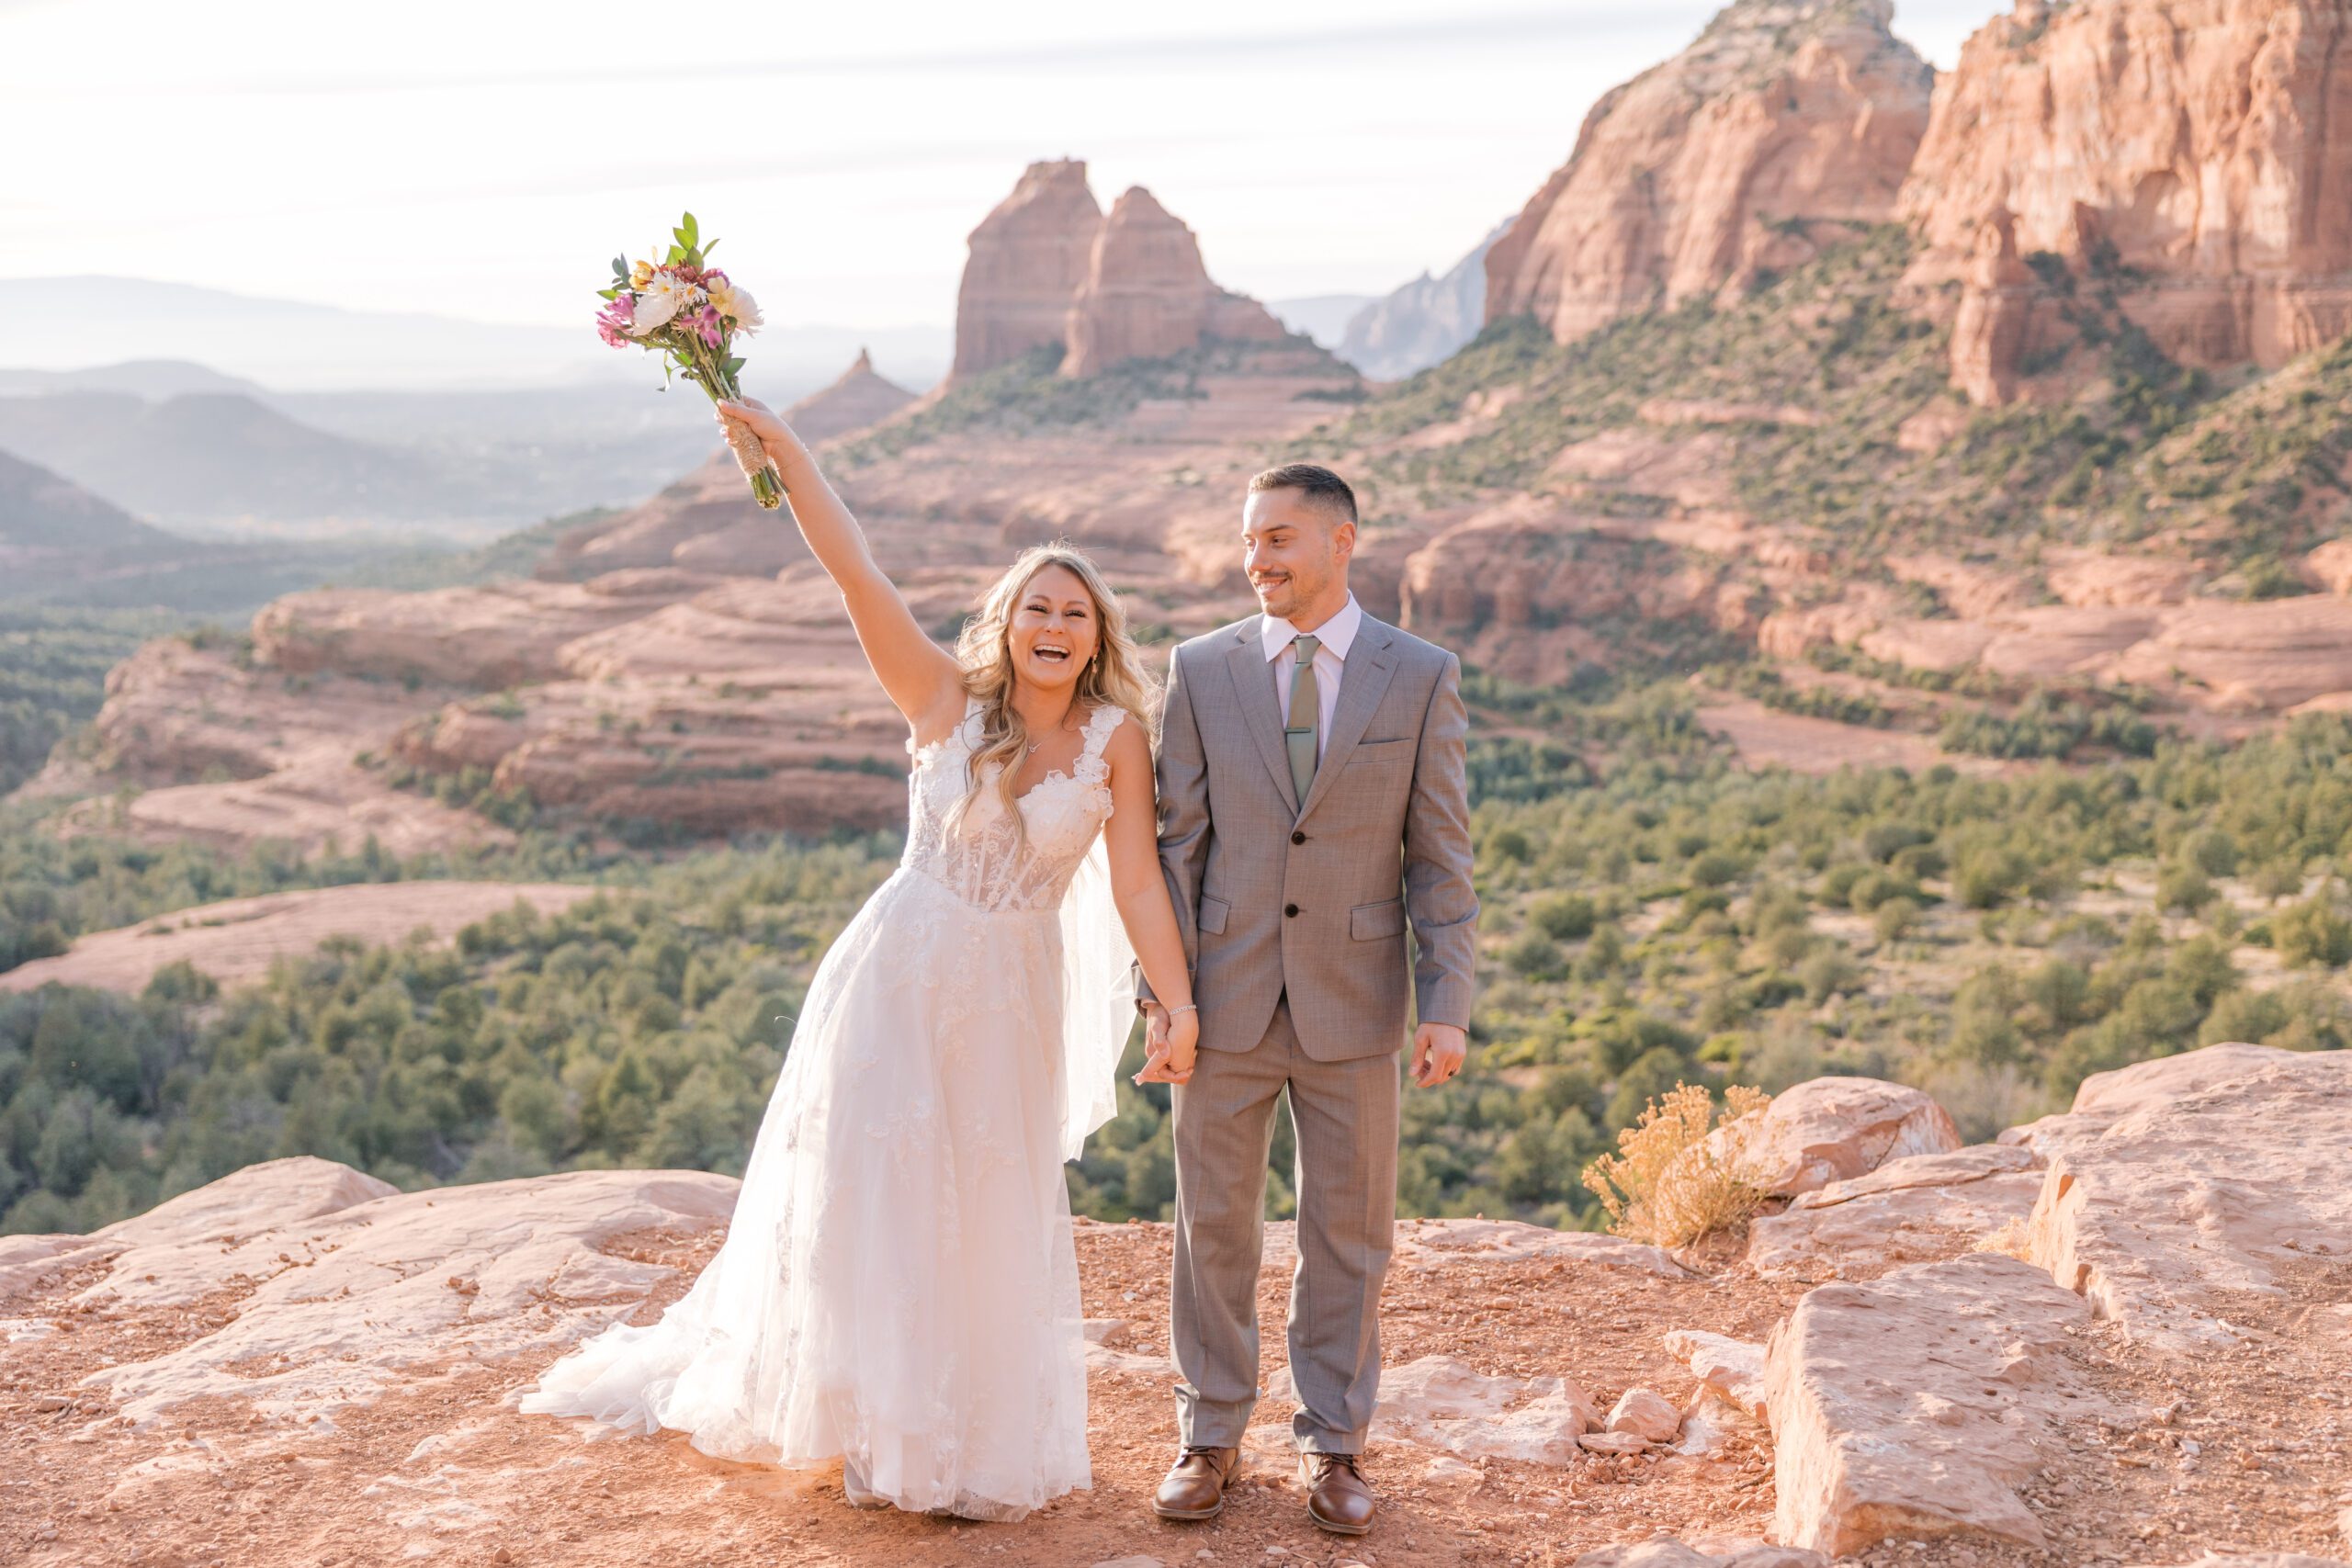 Bride in a white dress raises her arm in the air with joy while holding her new husband's hand. The groom is wearing a grey suit. Behind them are the views of red rocks from Merry Go Round rock.